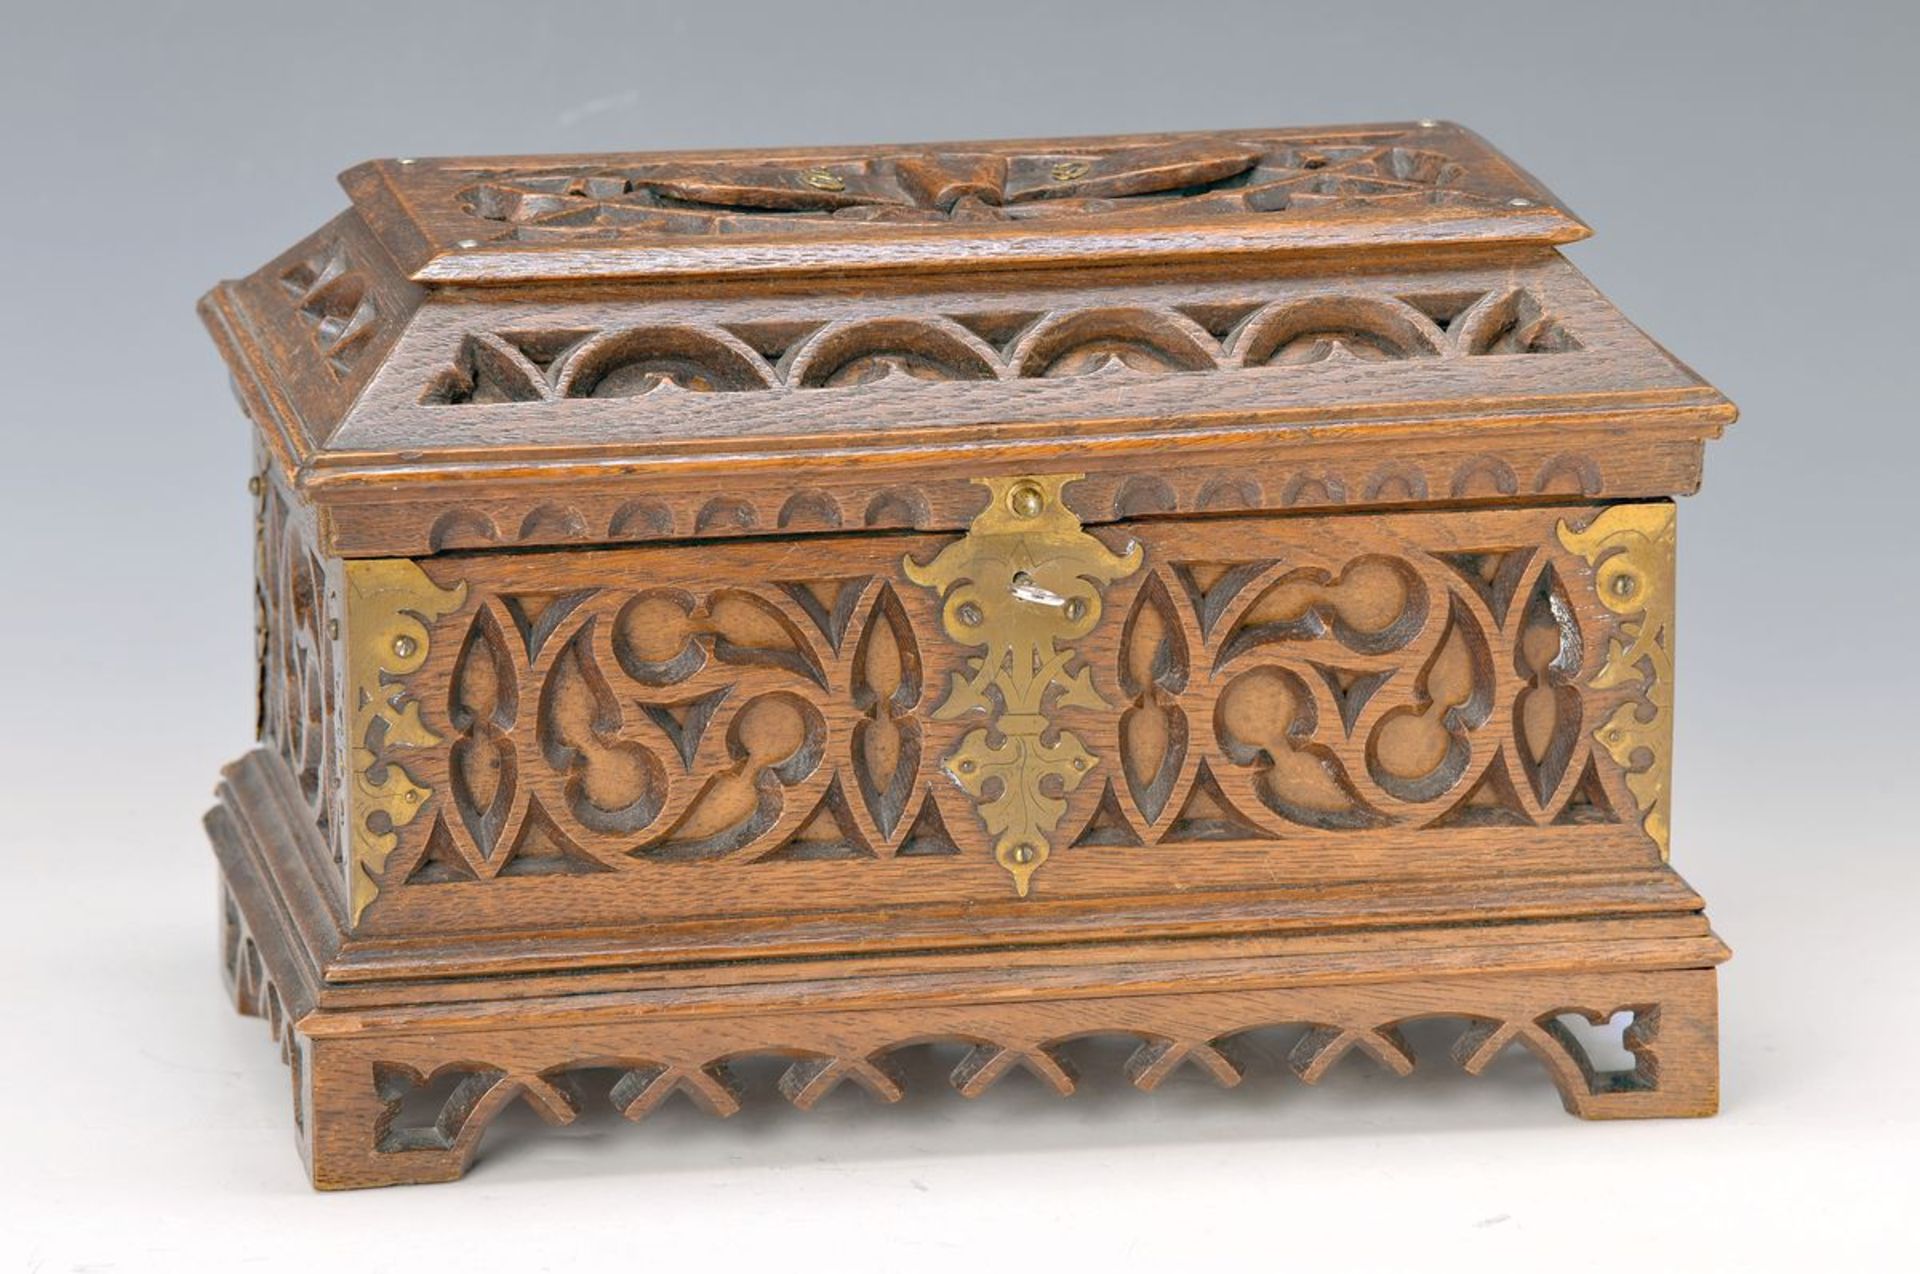 lidded box, neo-Gothic, around 1890, oak massive, carved, dat. 89 with metal numerals, key do not